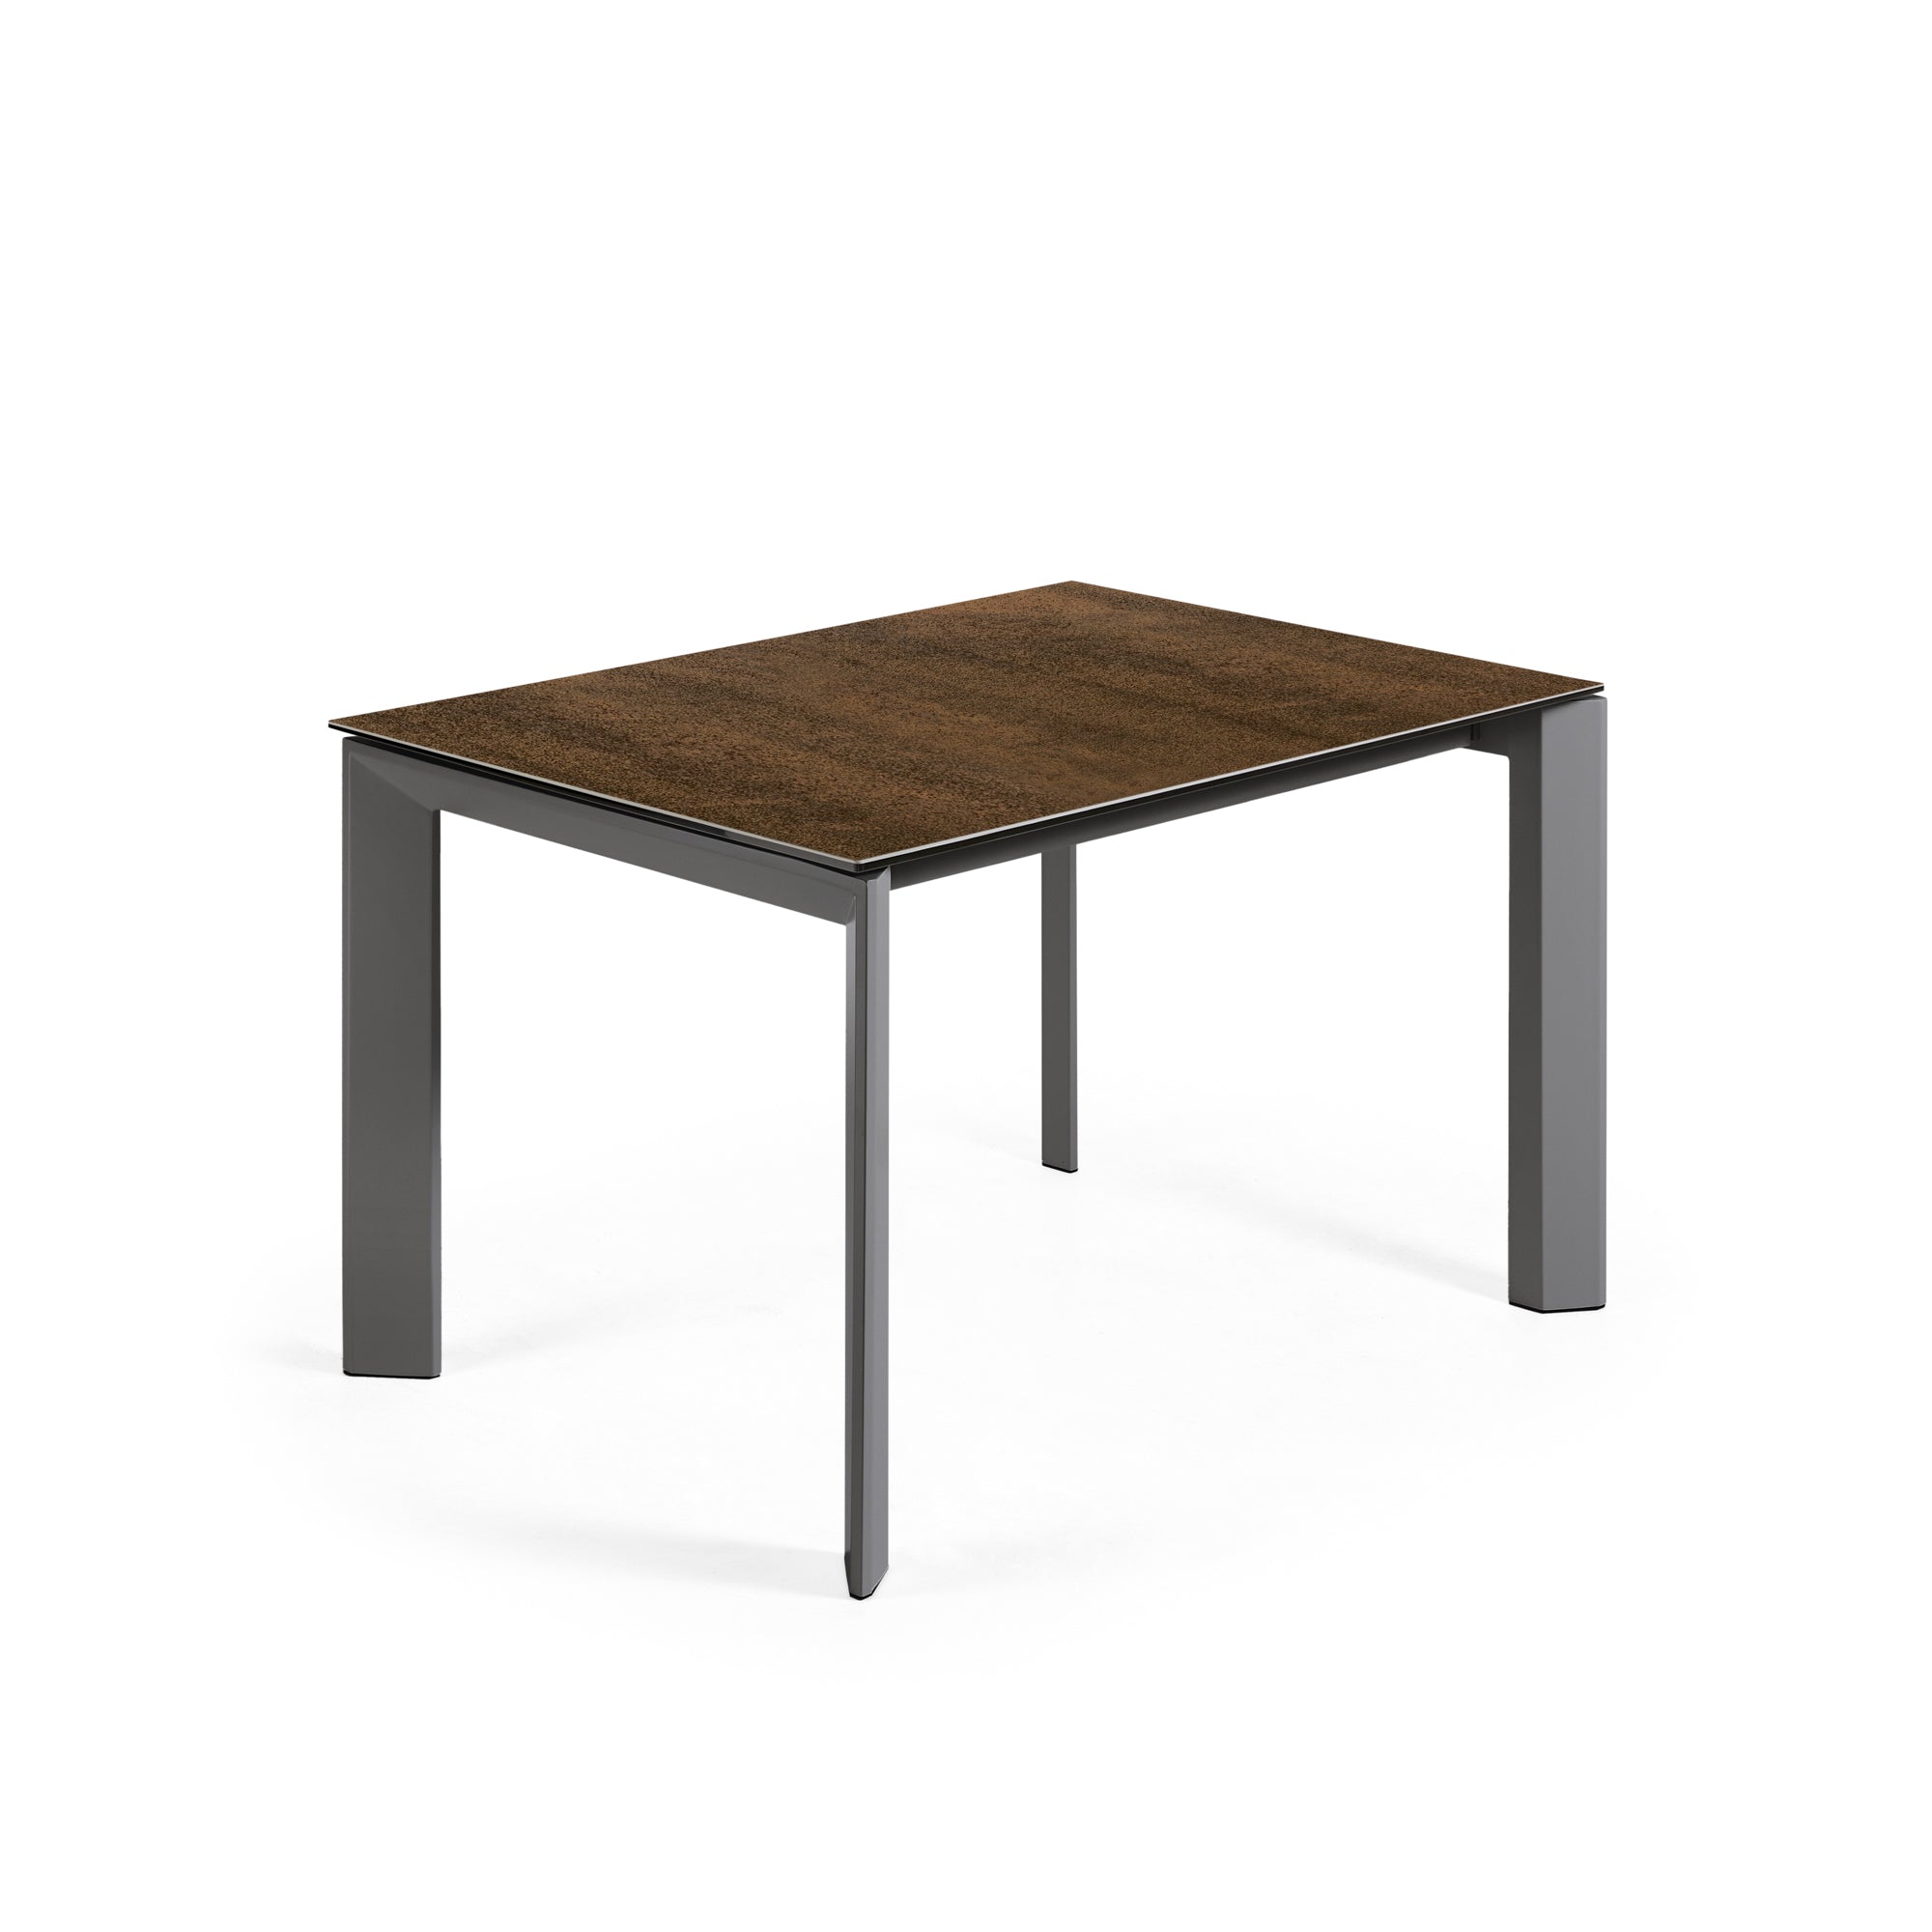 Axis extendable porcelain table with Iron Corten finish and dark gray legs, 120 (180) cm